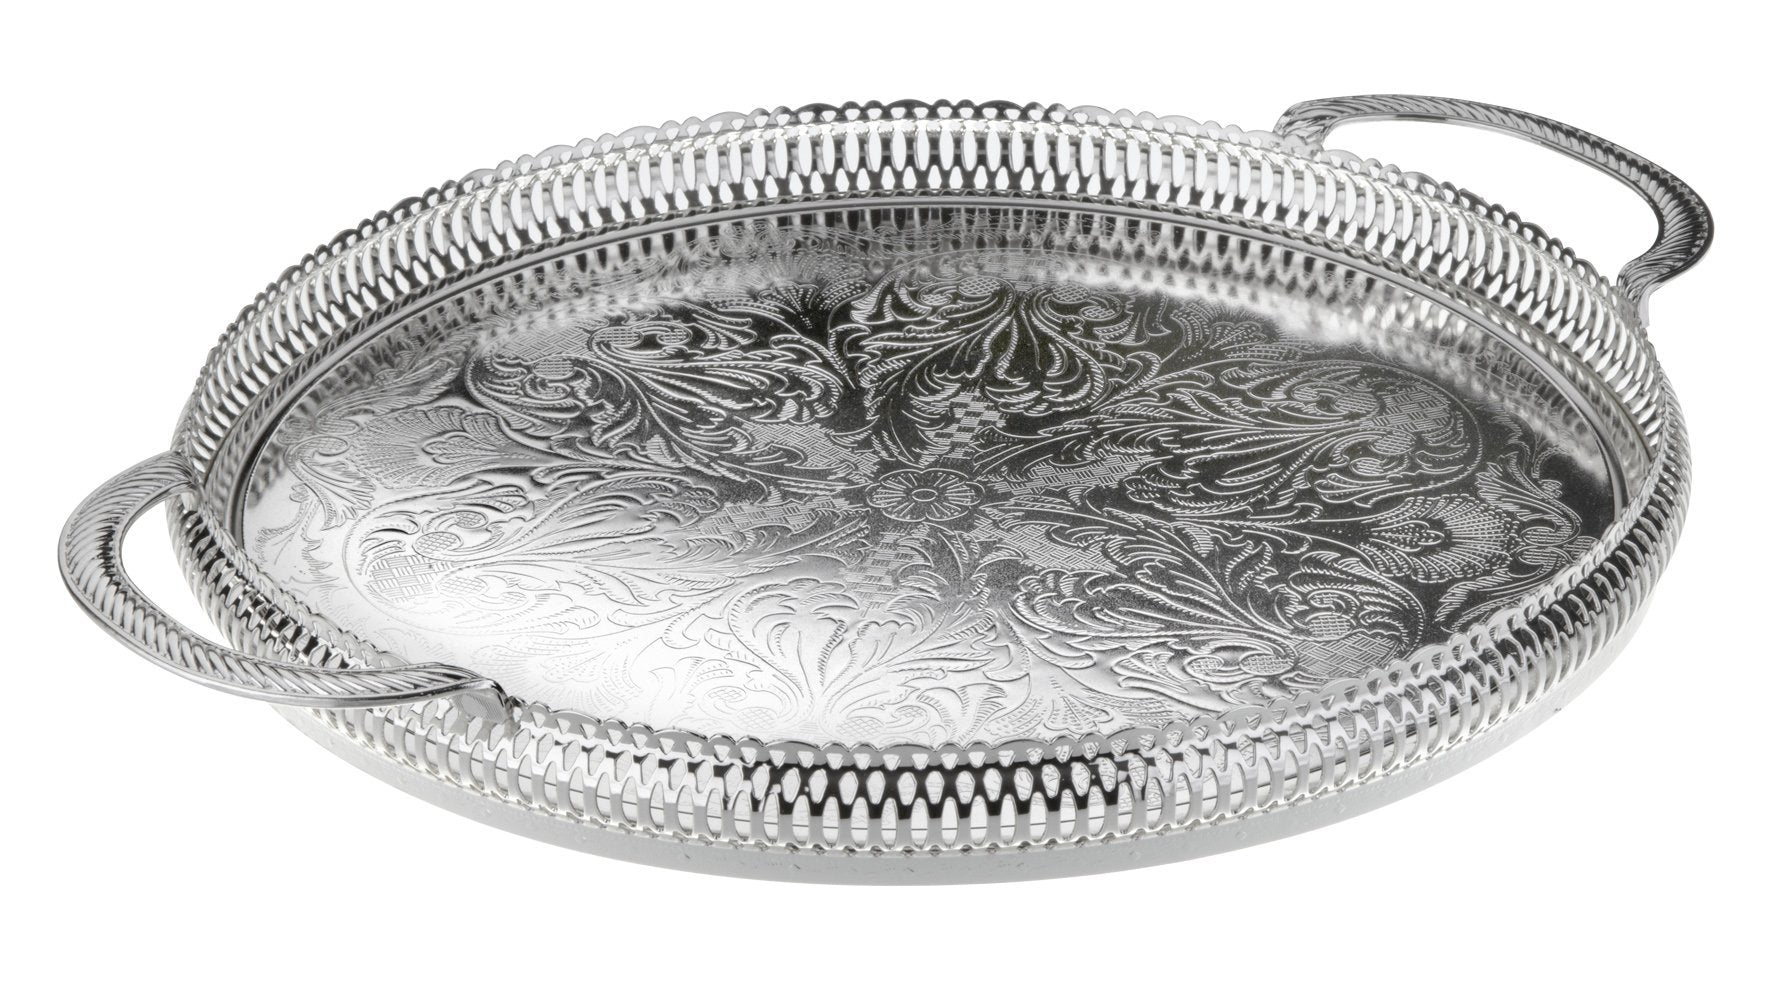 Queen Anne - Round Tray with Handles - Silver Plated Metal - 28cm - 26000432